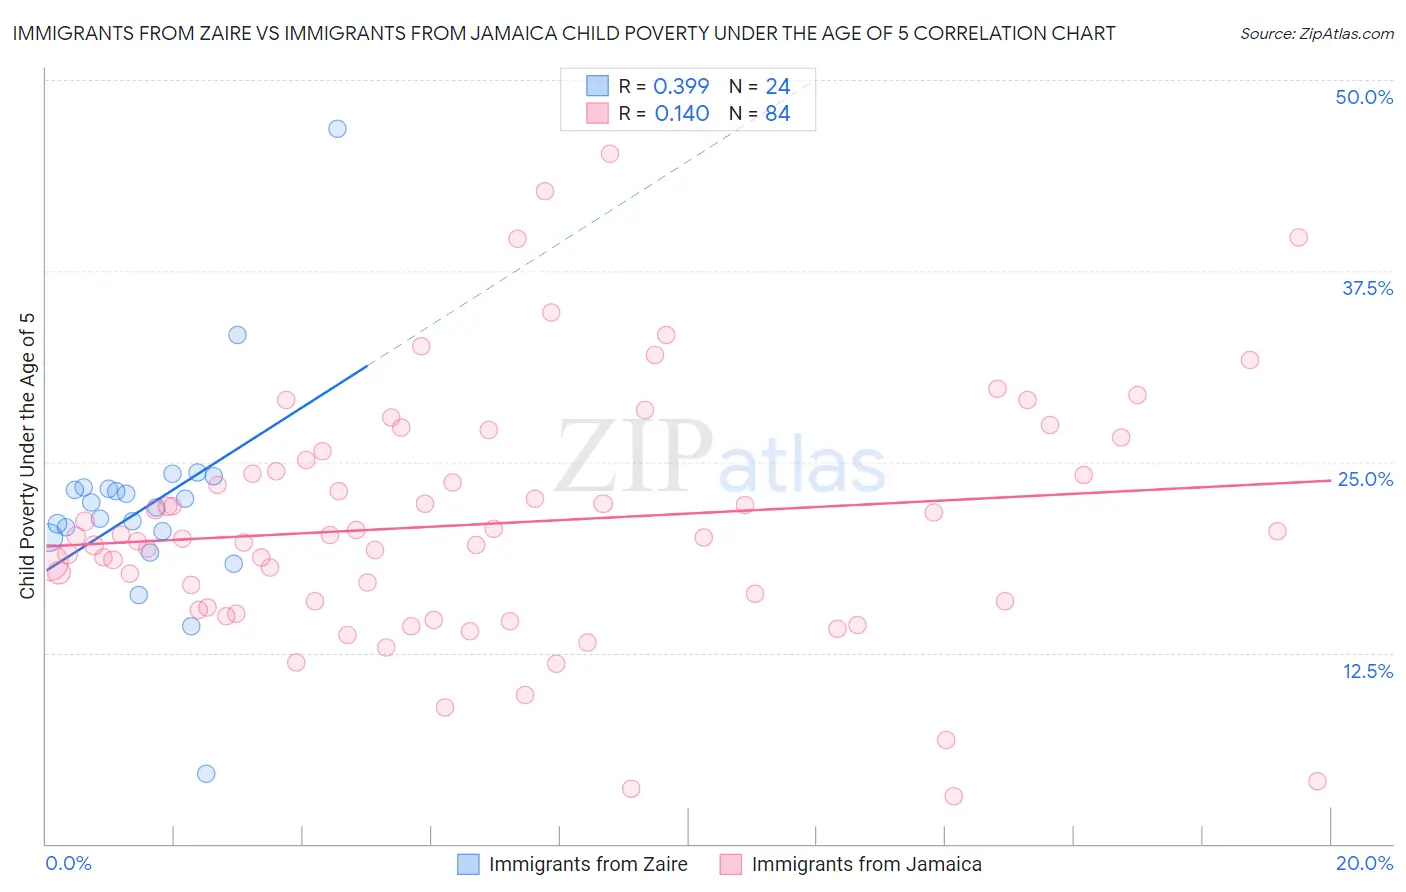 Immigrants from Zaire vs Immigrants from Jamaica Child Poverty Under the Age of 5